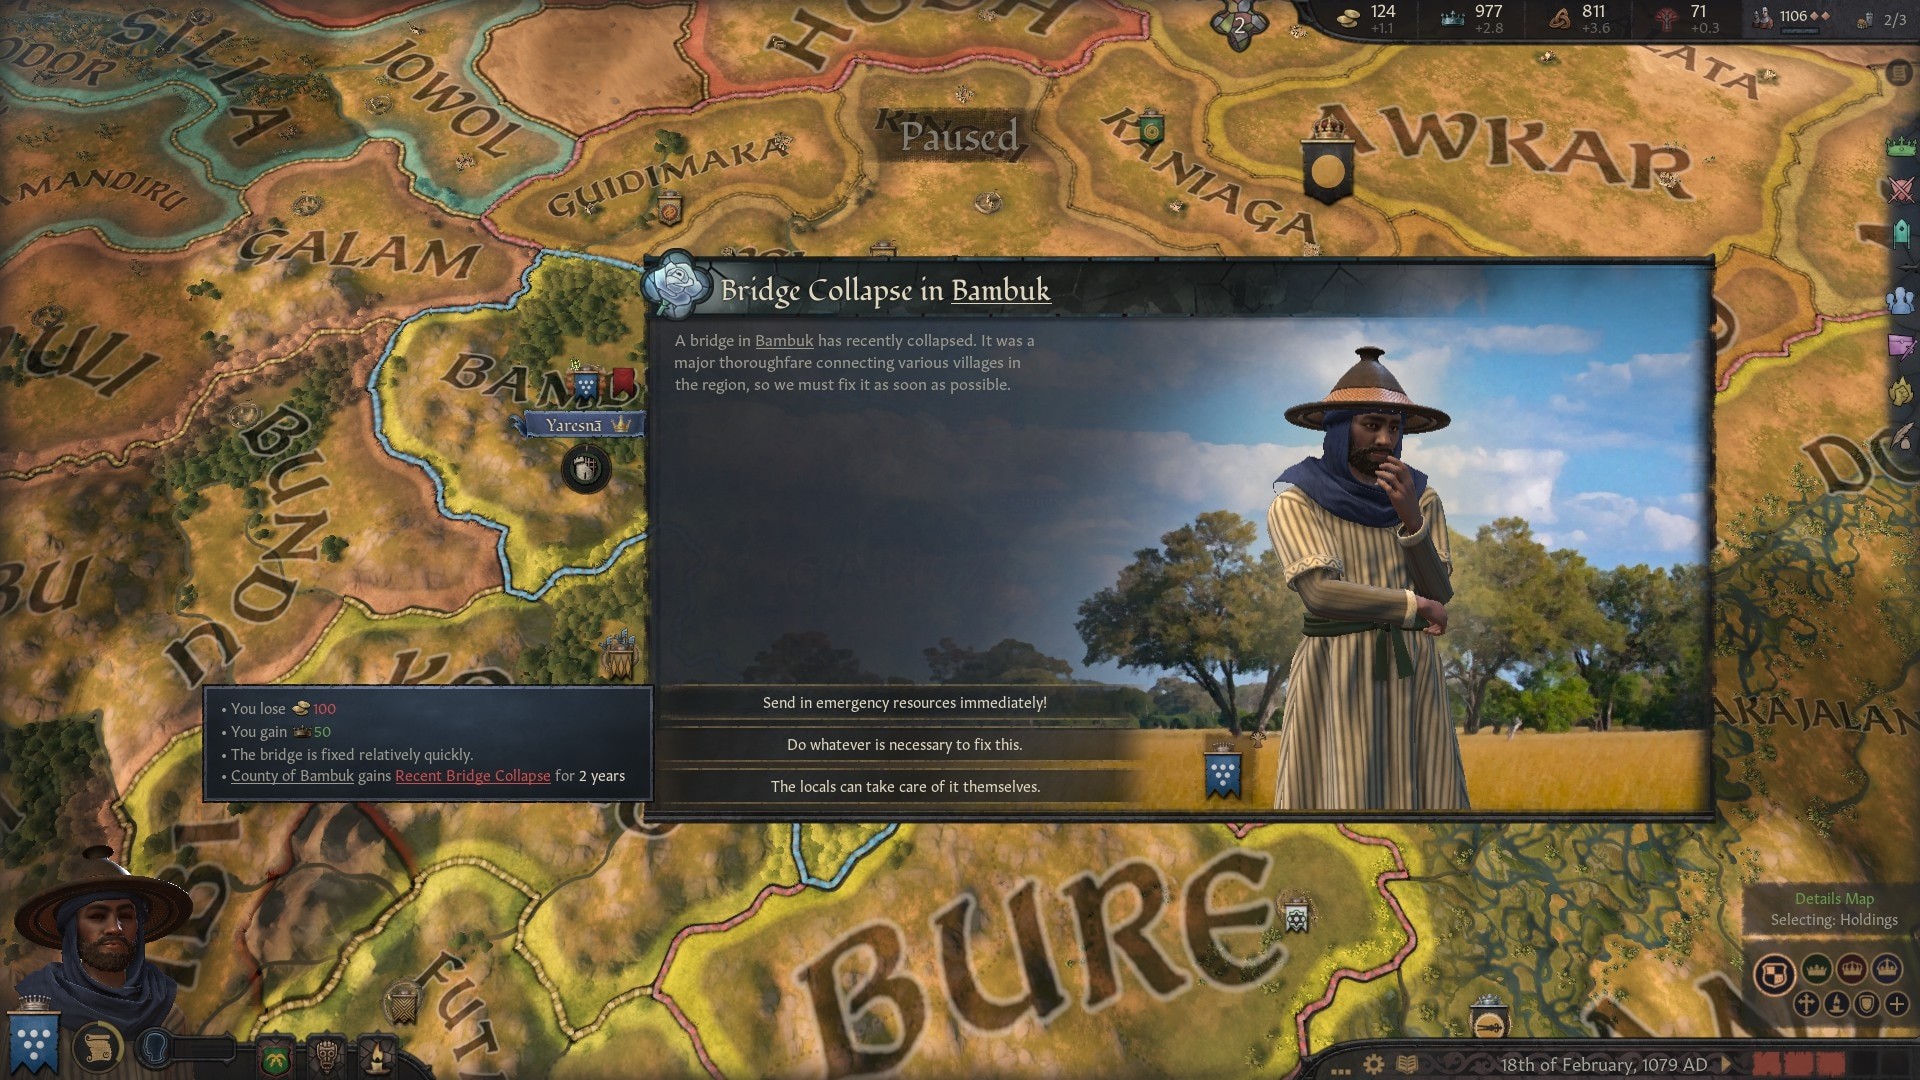 Crusader Kings 3 mod that adds new events.